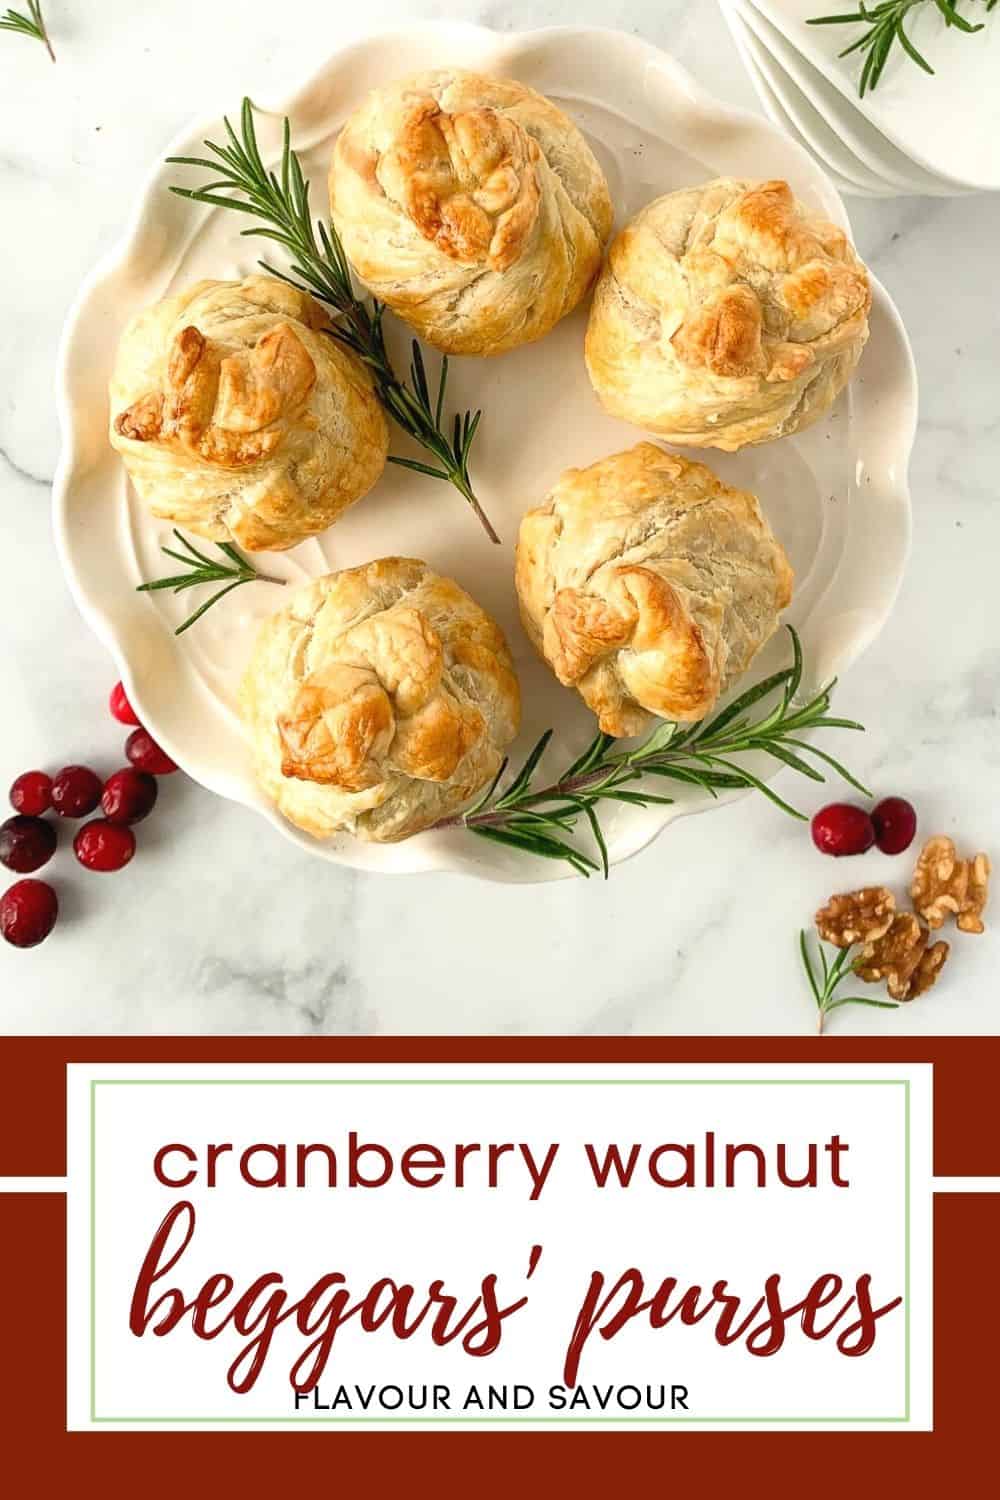 image and text for cranberry walnut beggars' purses